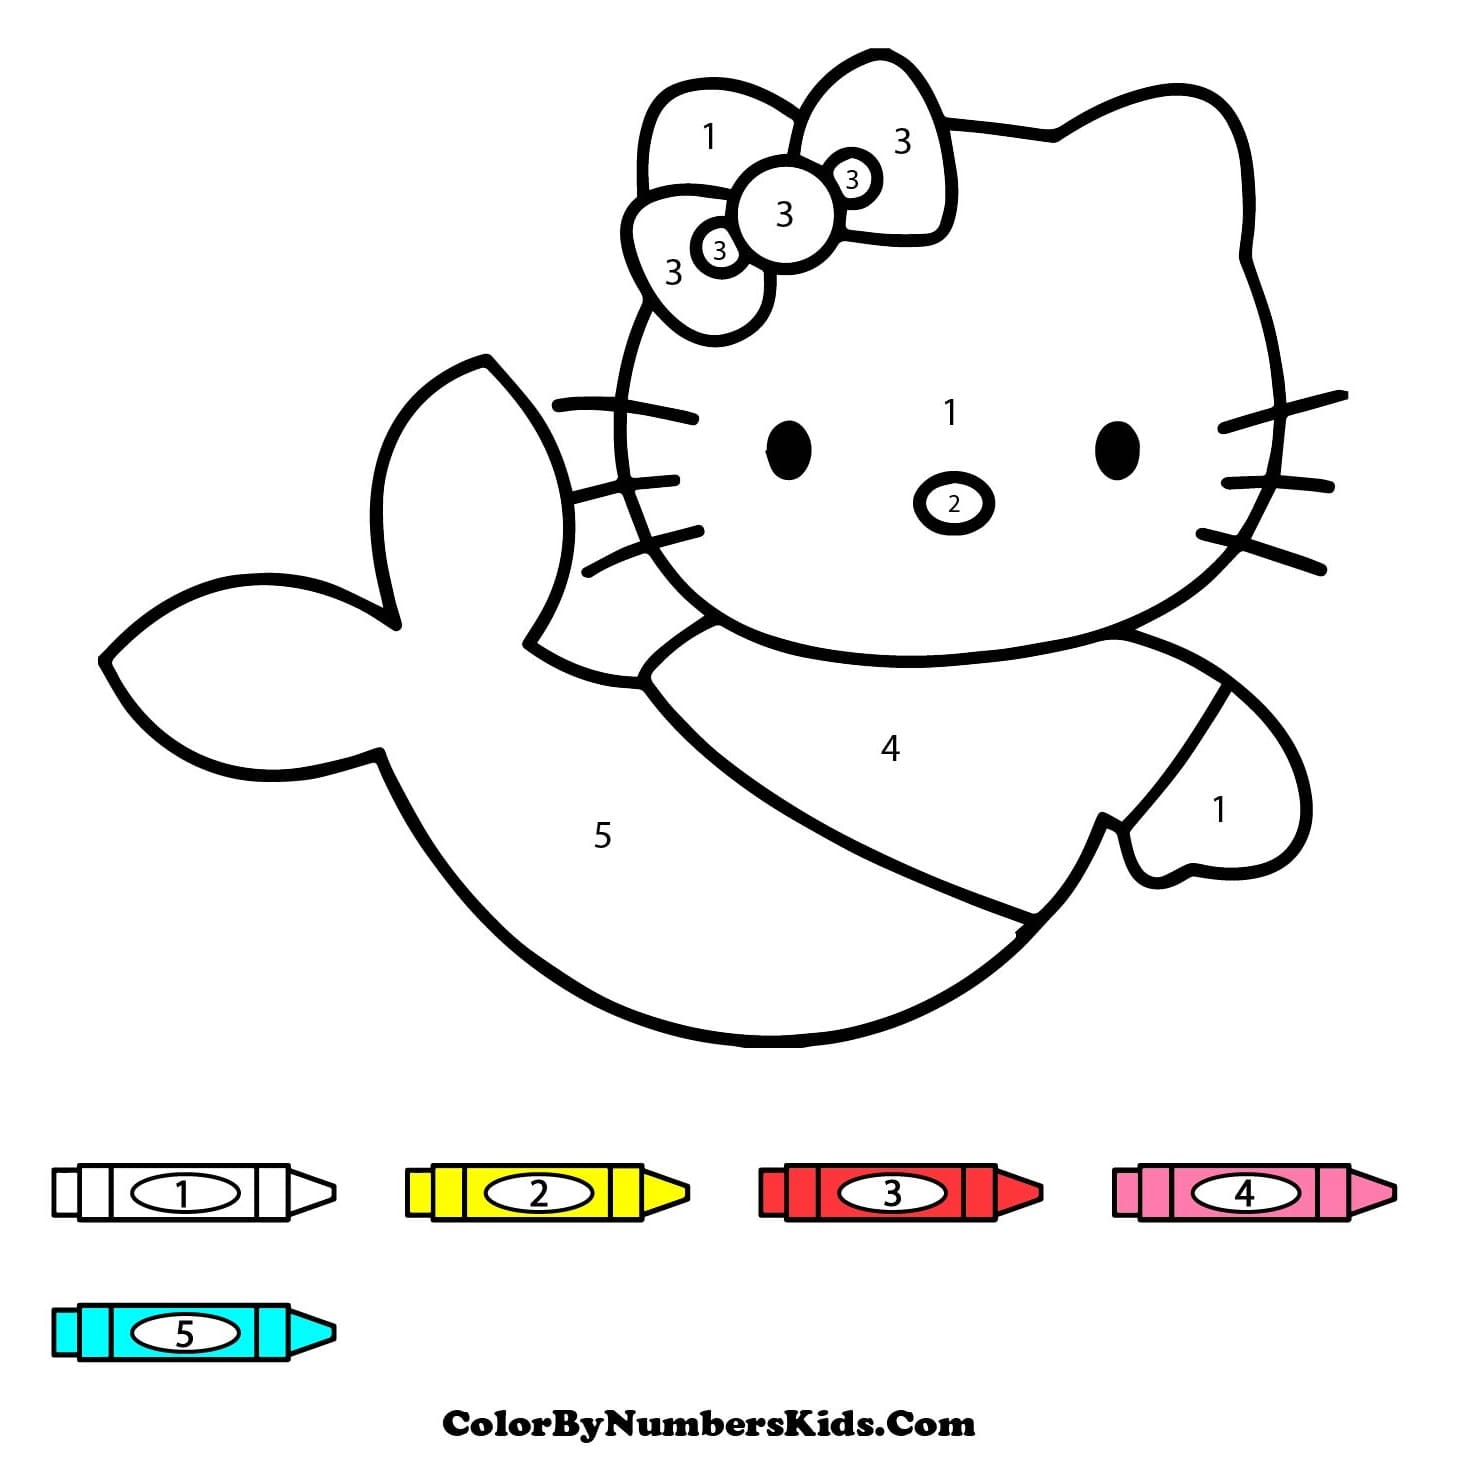 Mermaid Hello Kitty Color By Number